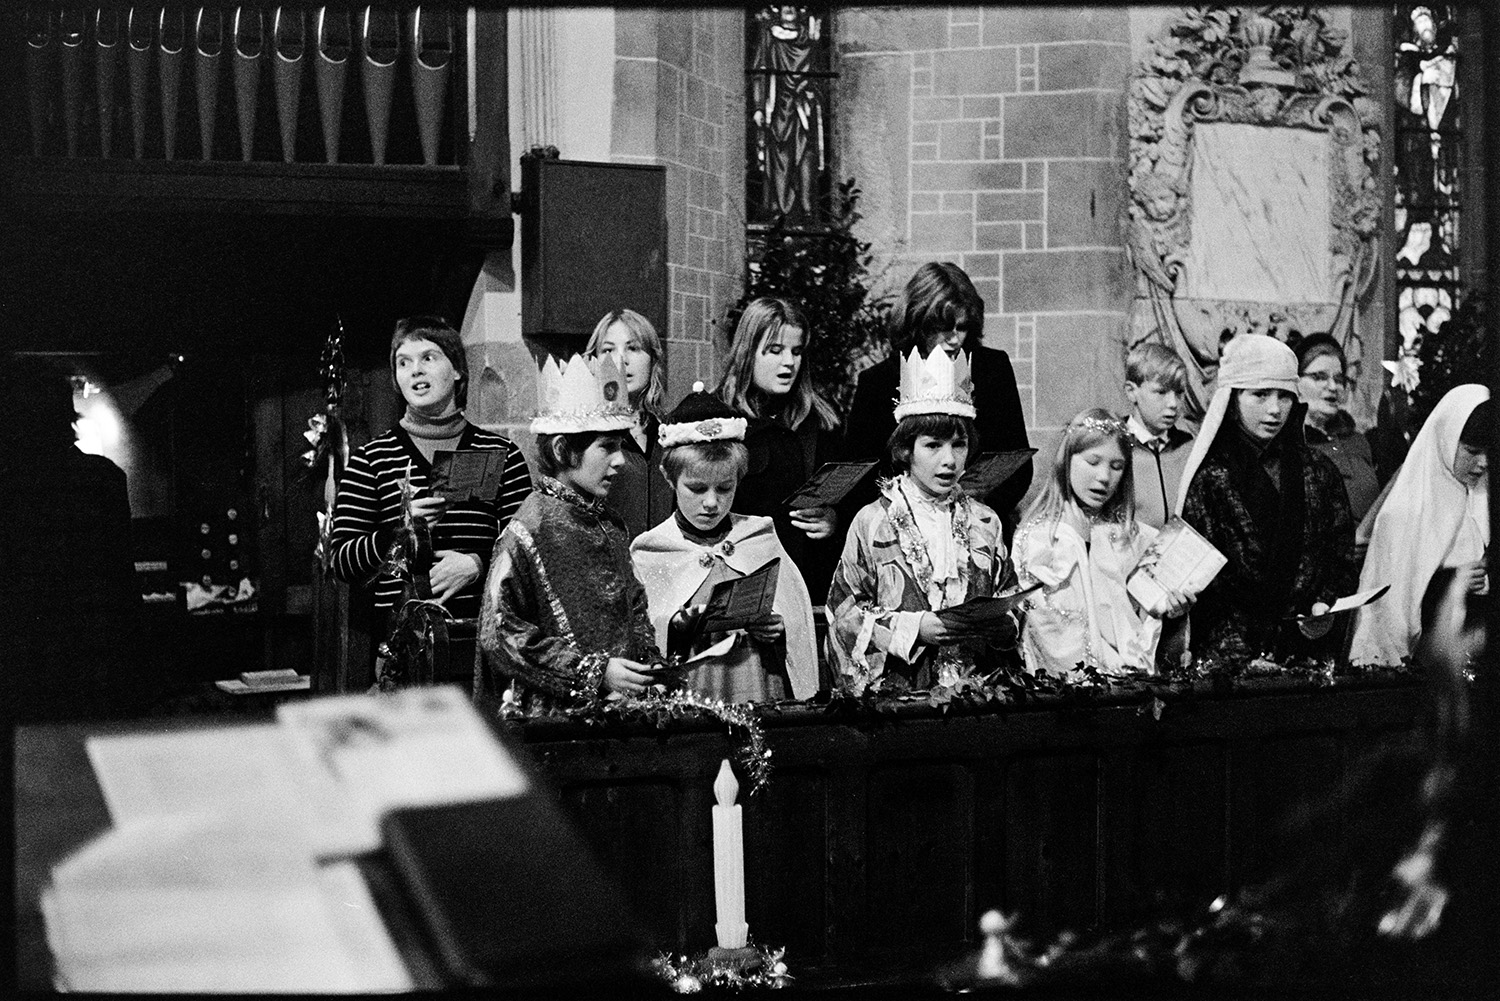 Nativity play, children in church. 
[Children singing a hymn in Dolton Church. They are dressed up as kings, angels and shepherds for a nativity play. The church is decorated for Christmas with tinsel.]